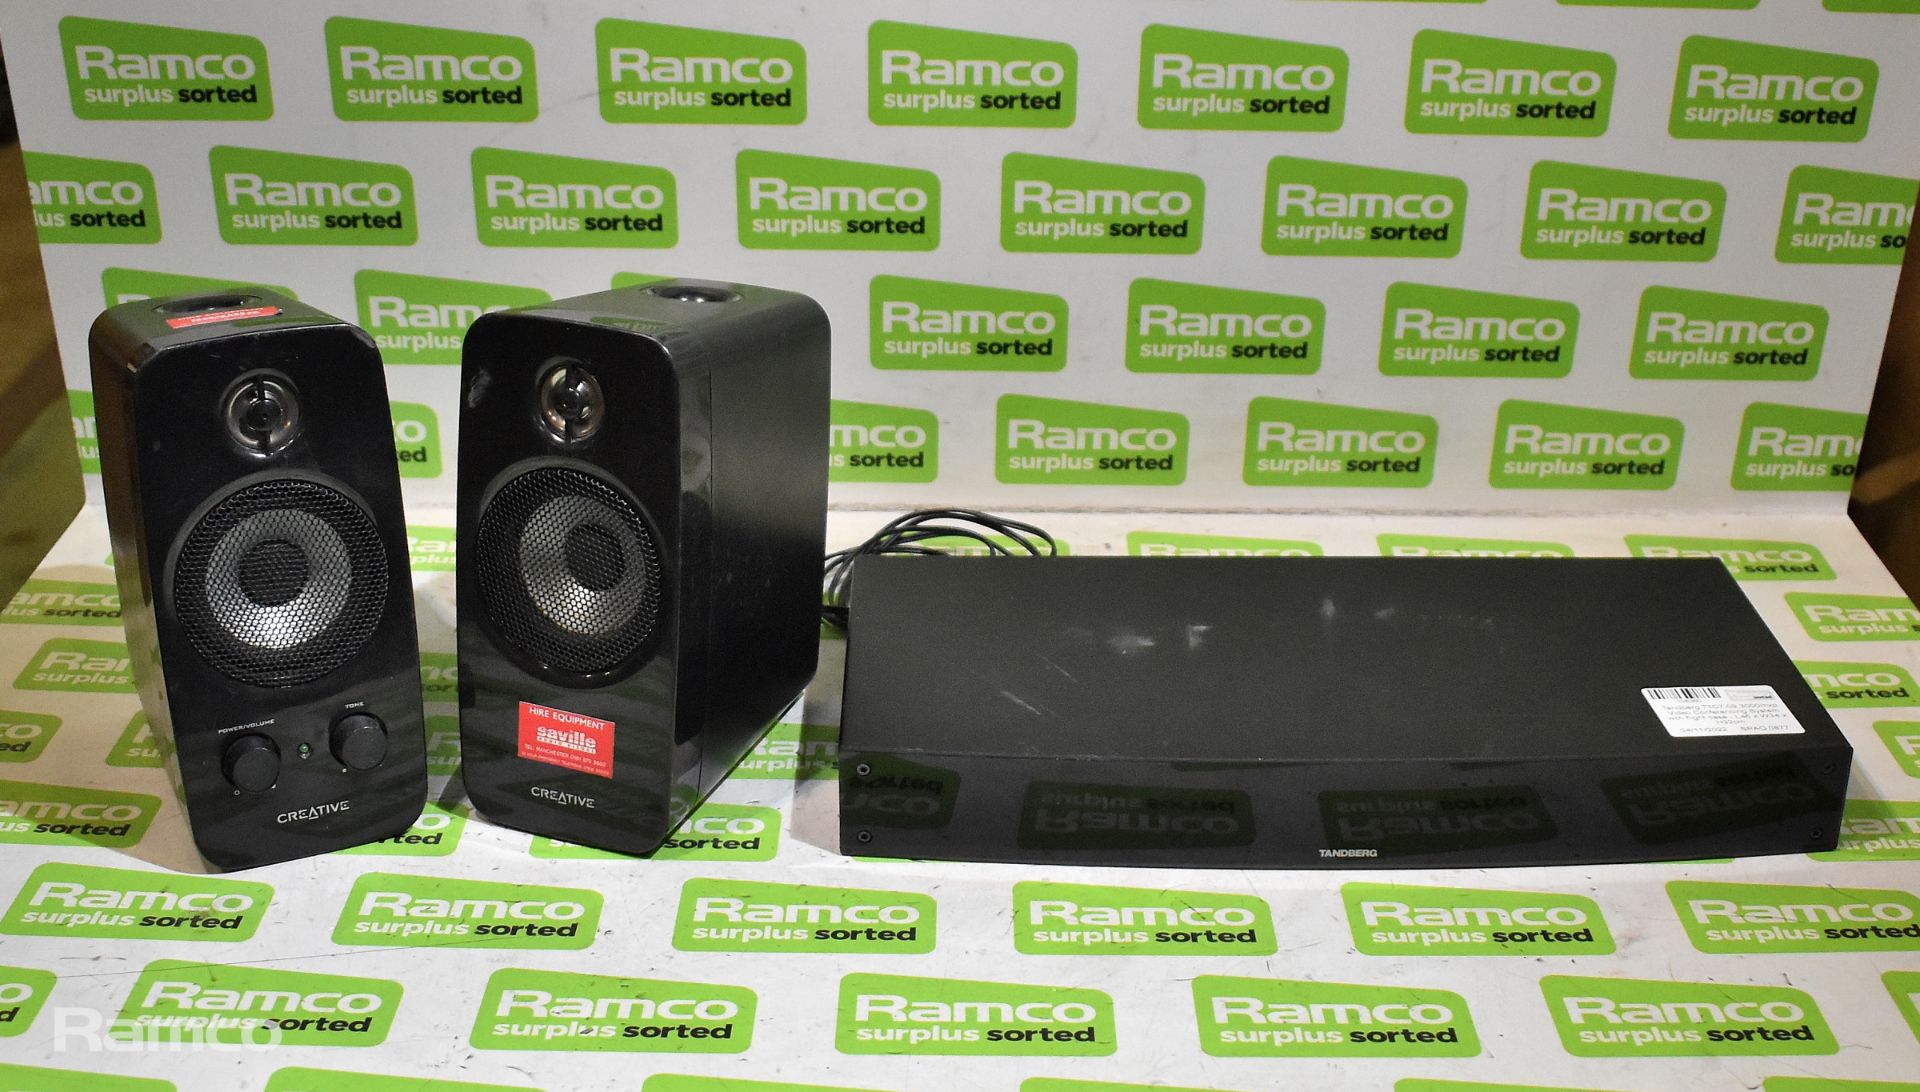 Tandberg TTC7-09 3000mxp Video Conferencing System with flight case - L46 x W34 x H32cm - Image 3 of 7